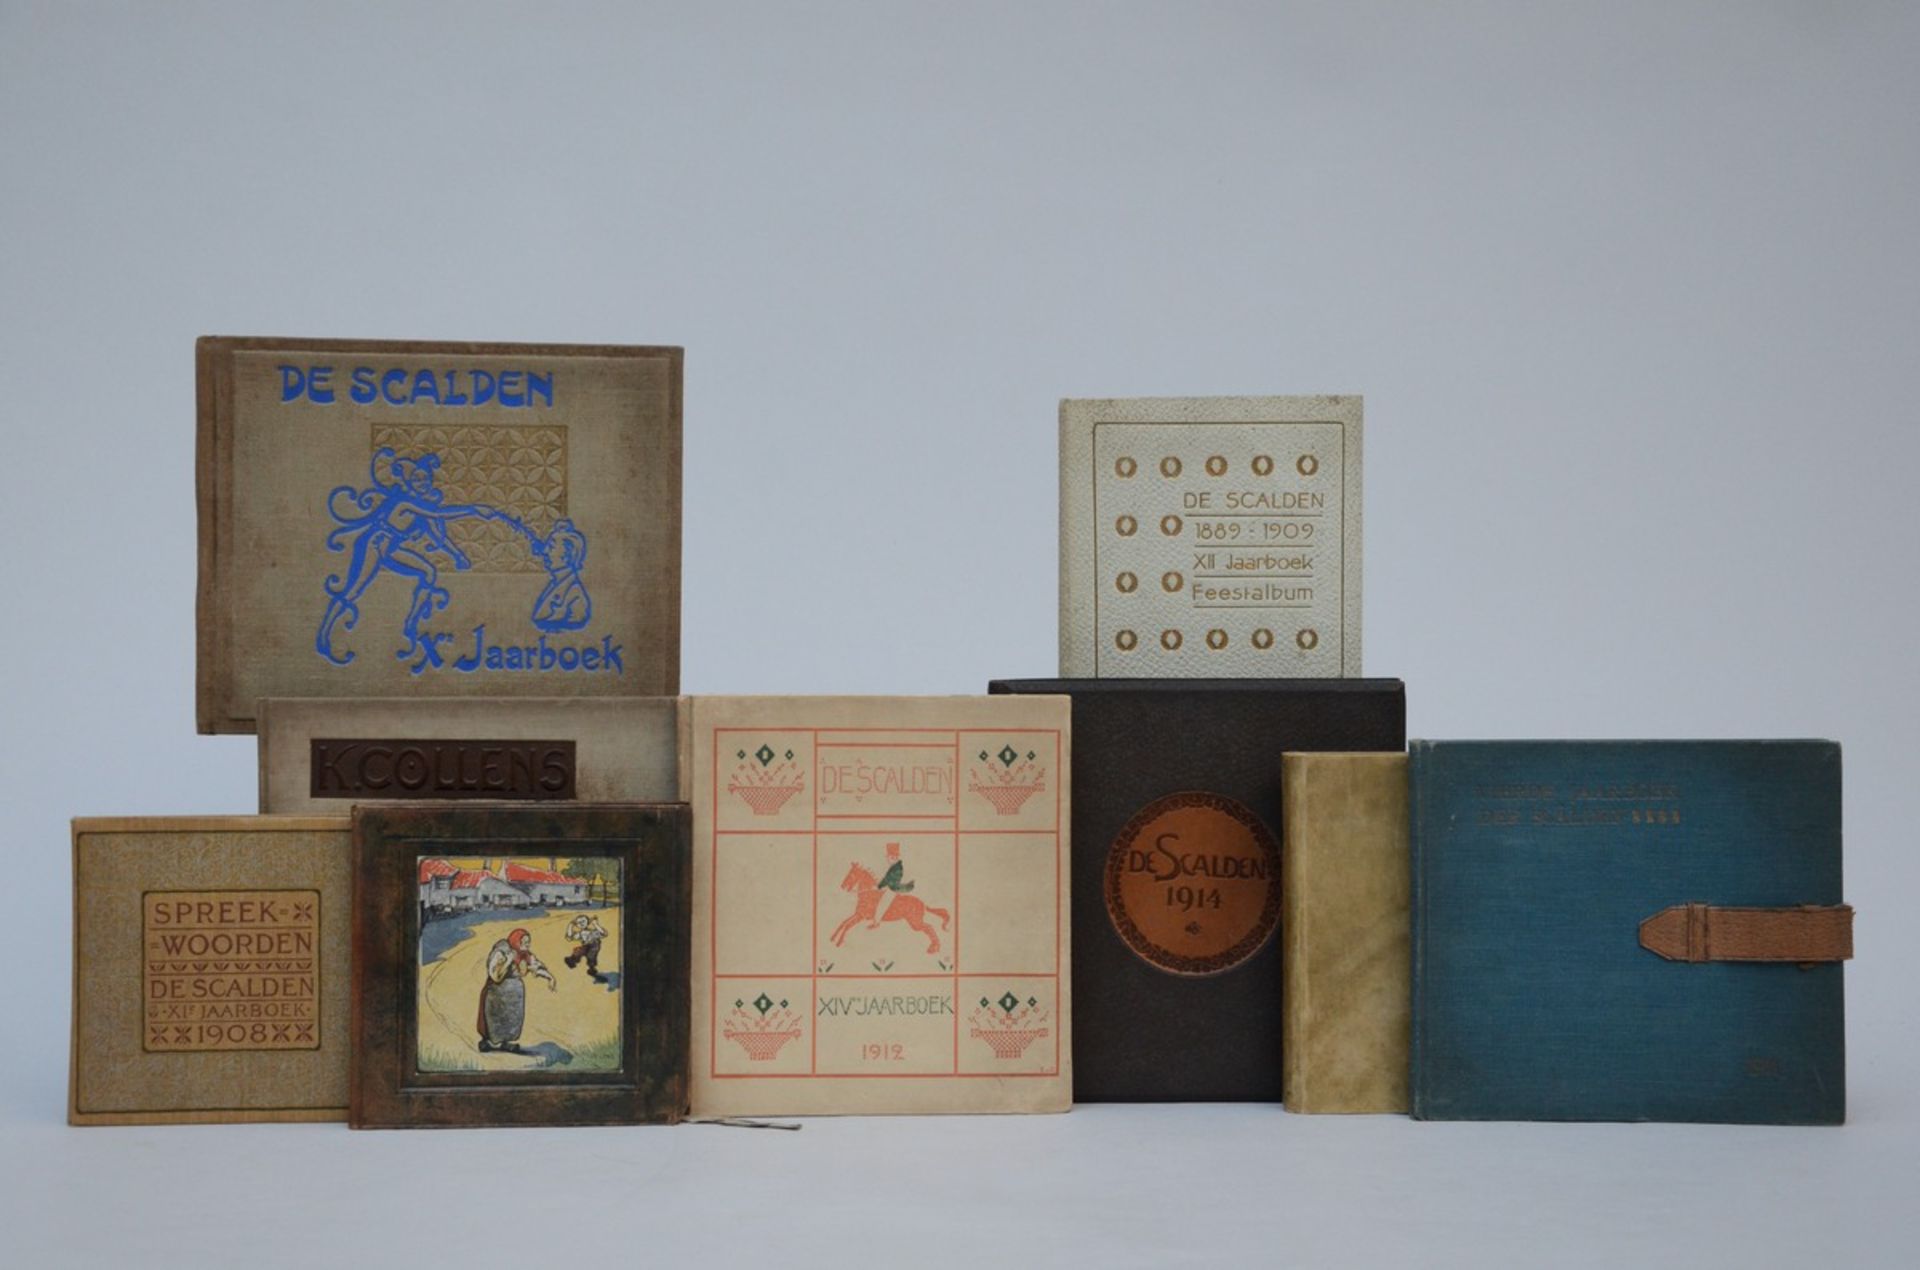 9 year books by De Scalden (from 16.5x17 to 21.5x26cm)